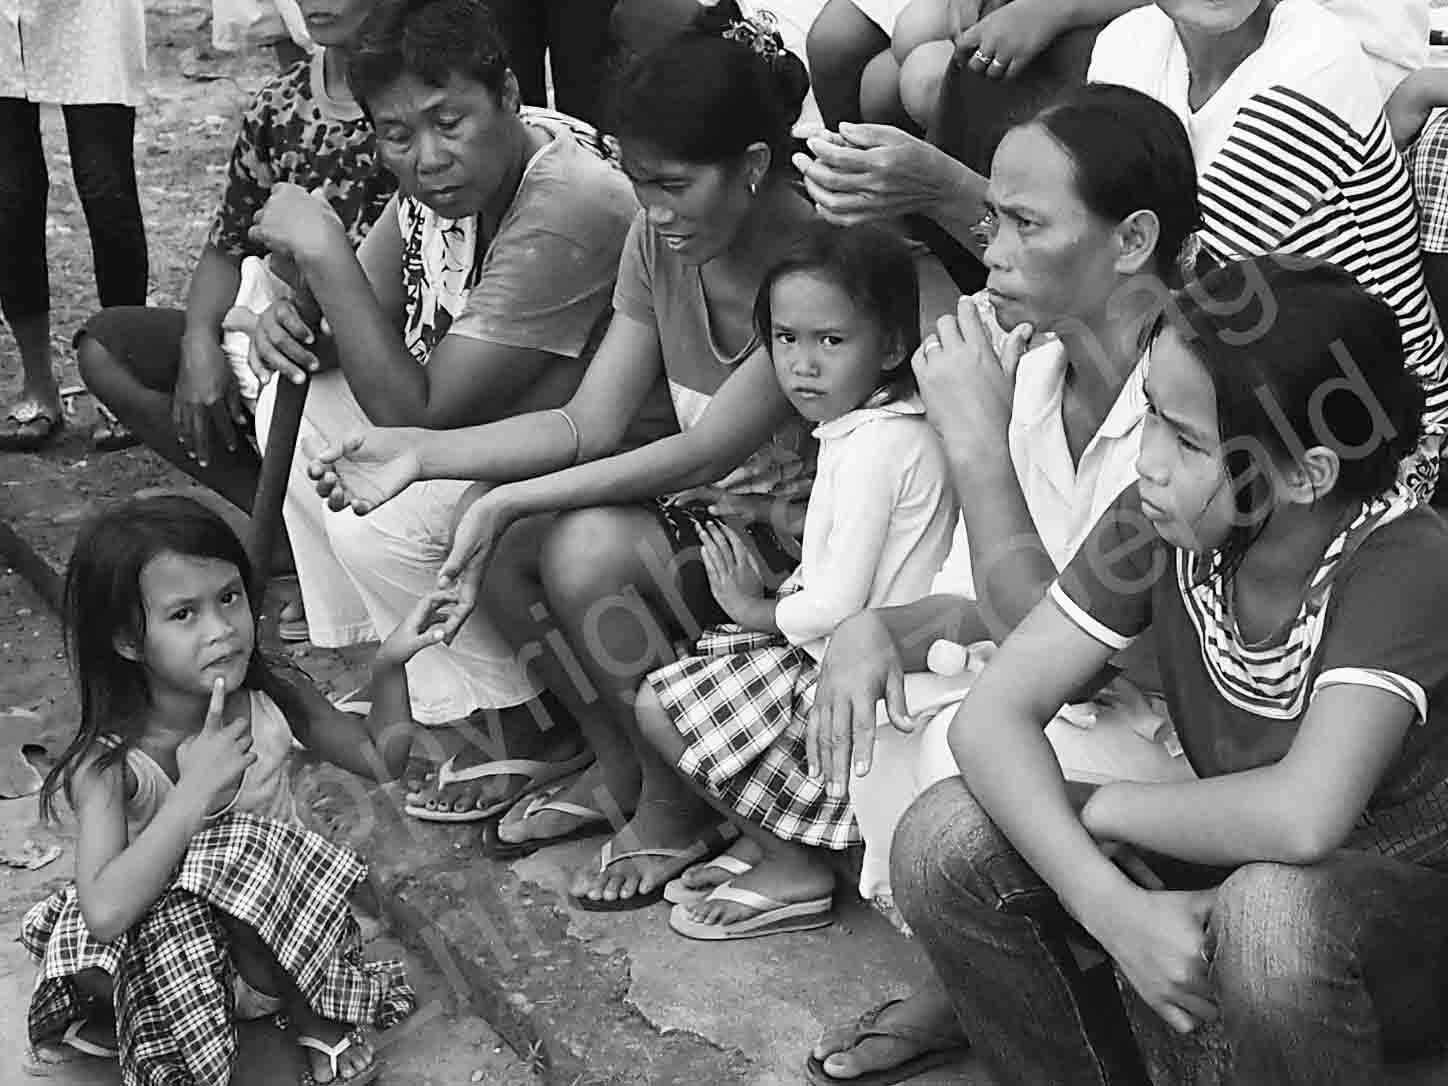   Families wait for health checkups and assistance following Typhoon Haiyan/Yolanda's onslaught in November, 2013.  